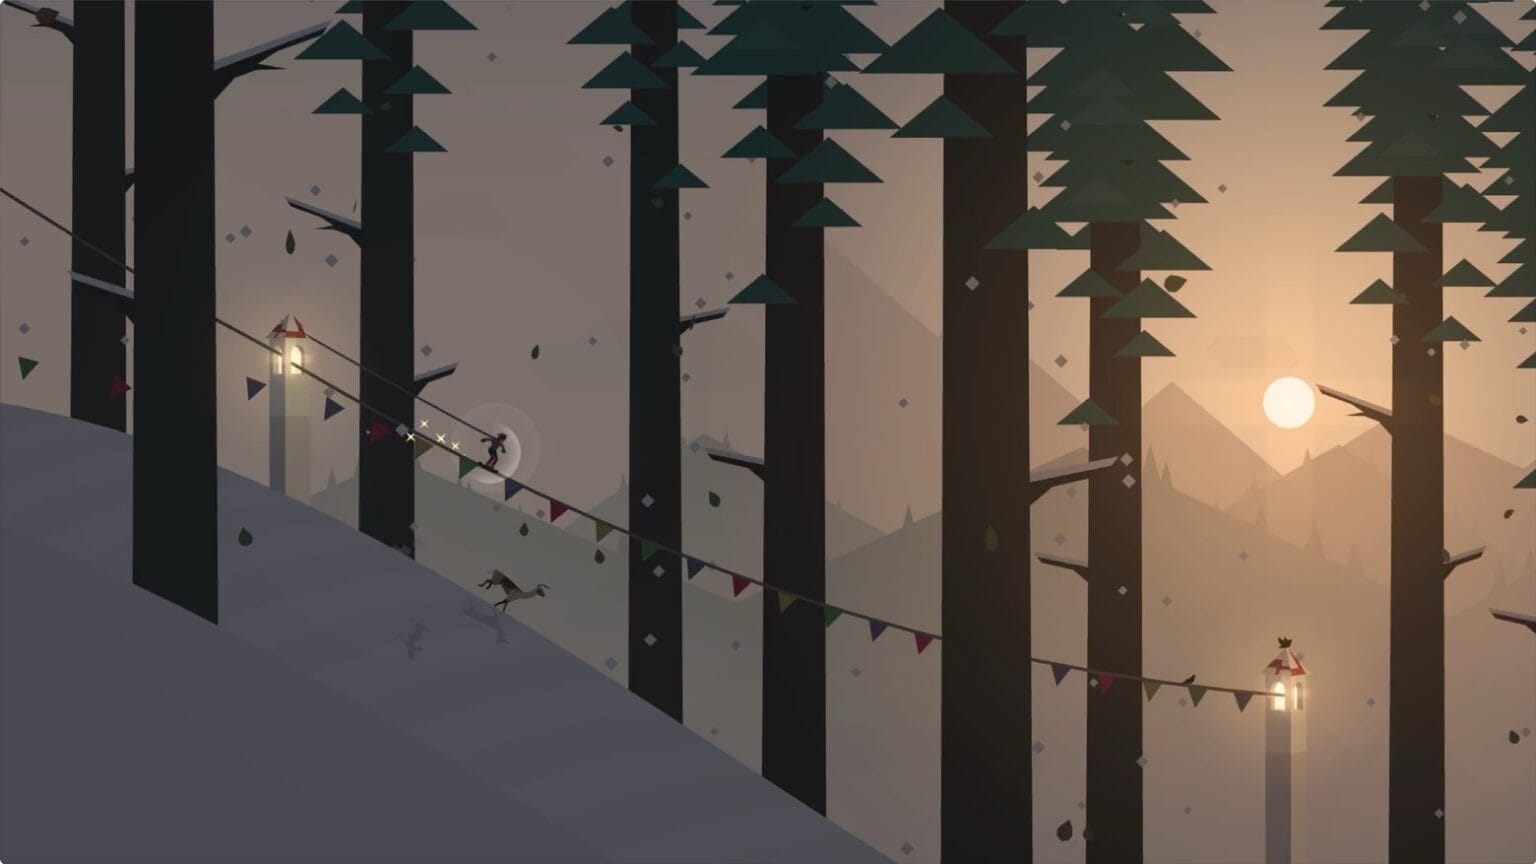 Take an exciting journey through ‘Alto's Adventure - Remastered’ on Apple Arcade